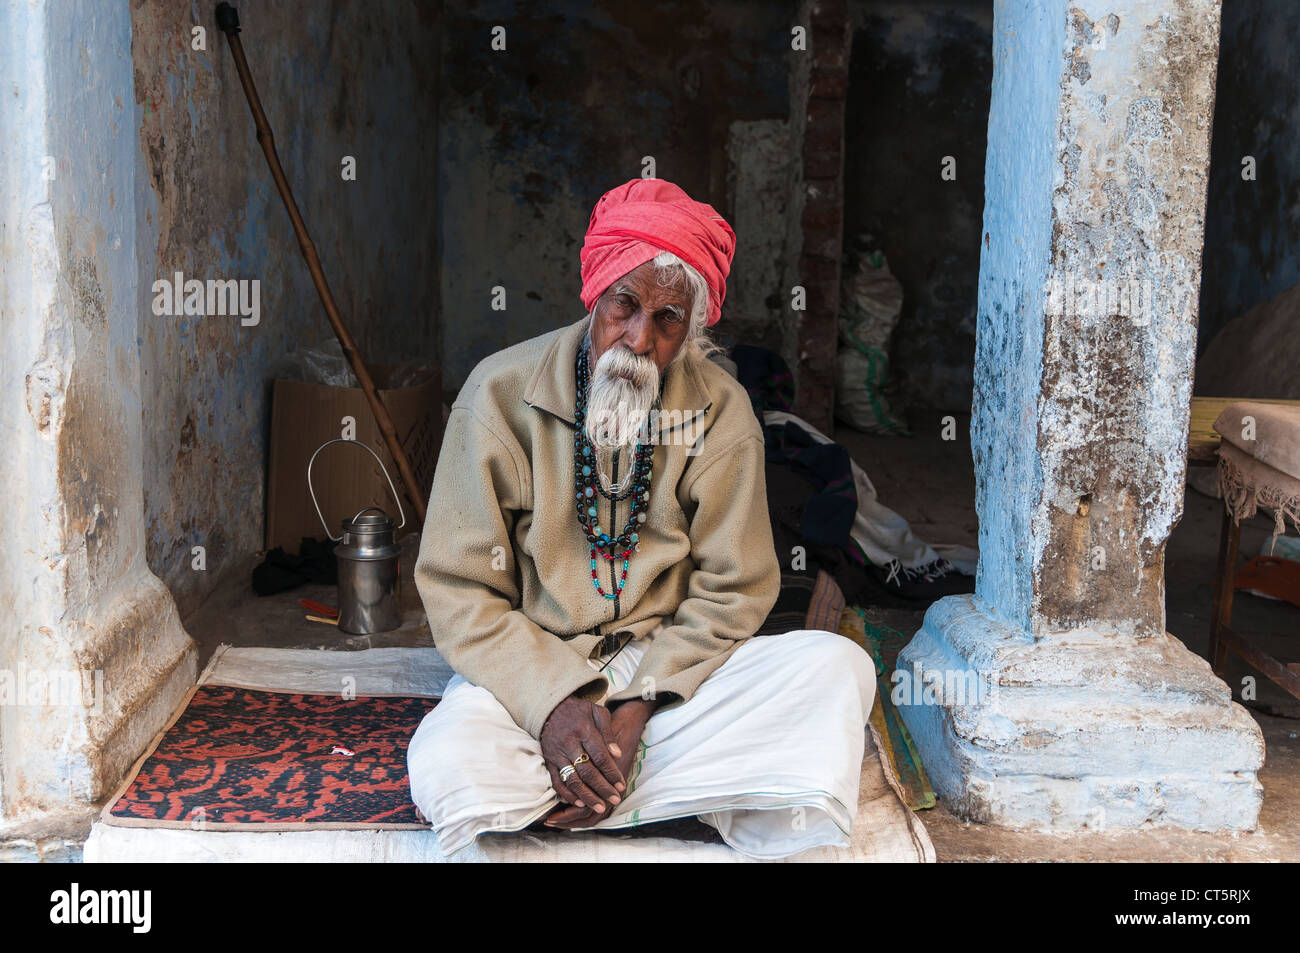 Old Indian man with a red turban, sitting in front of a doorway, Pushkar, Rajasthan, India Stock Photo